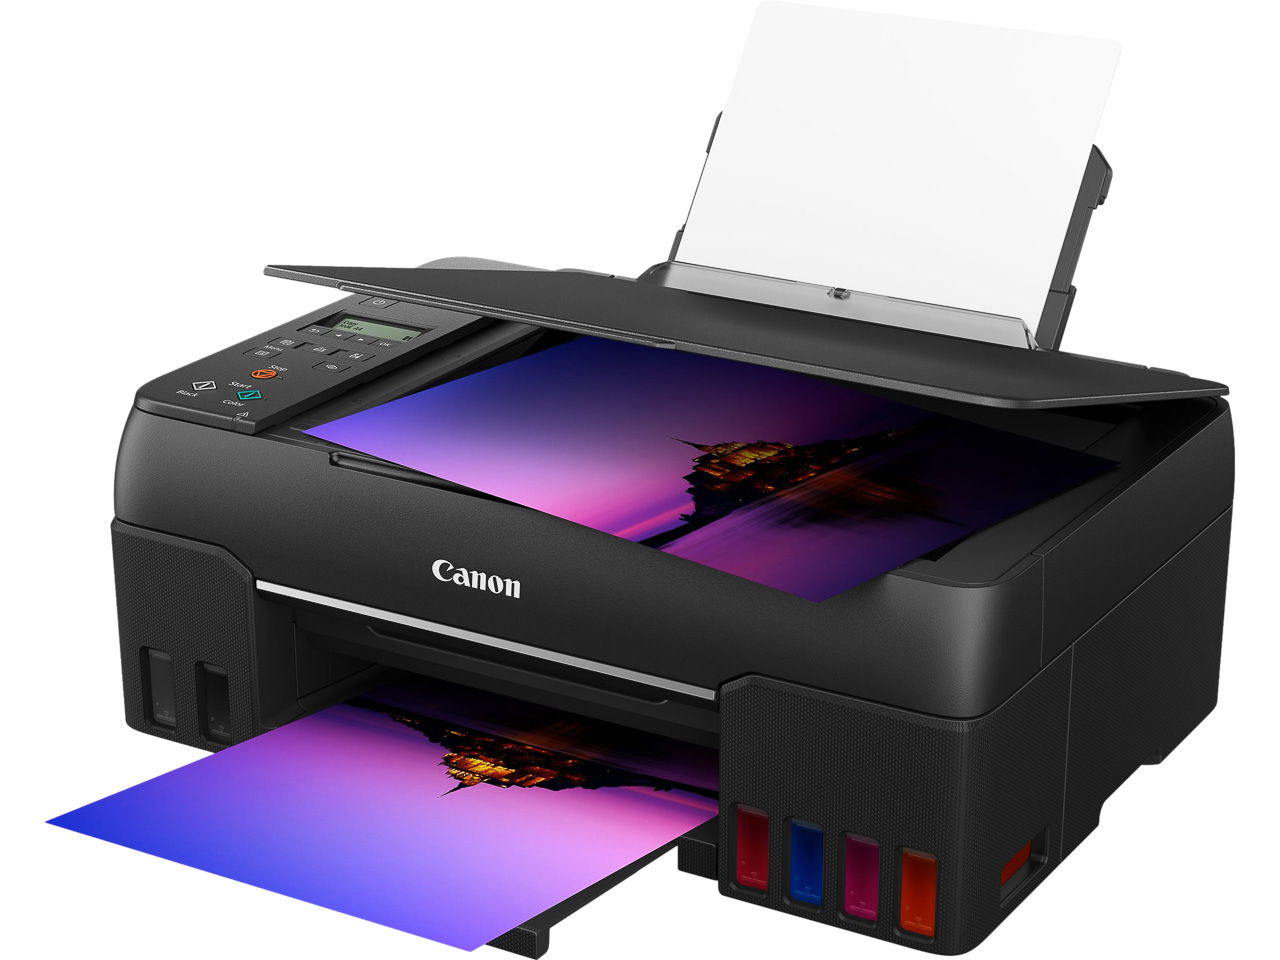 4620C006 CANON Pixma G650 3in1 Inkjet Printer color A4 Apple Airprint 1